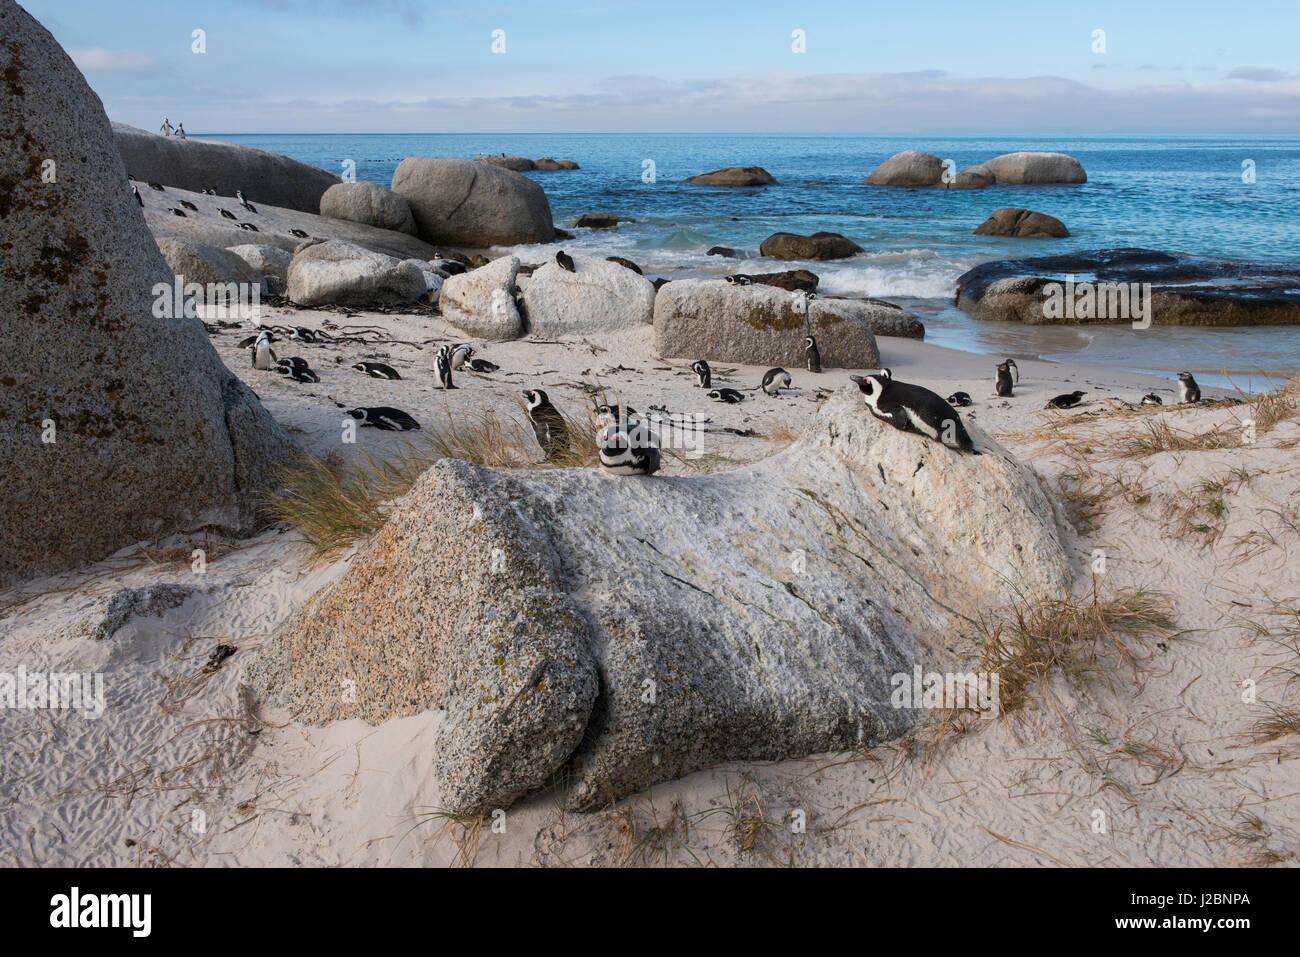 South Africa, Cape Town, Simon's Town, Table Mountain National Park, Boulders Beach. Colony of endangered African Penguins along False Bay at Foxy Beach. (Large format sizes available) Stock Photo